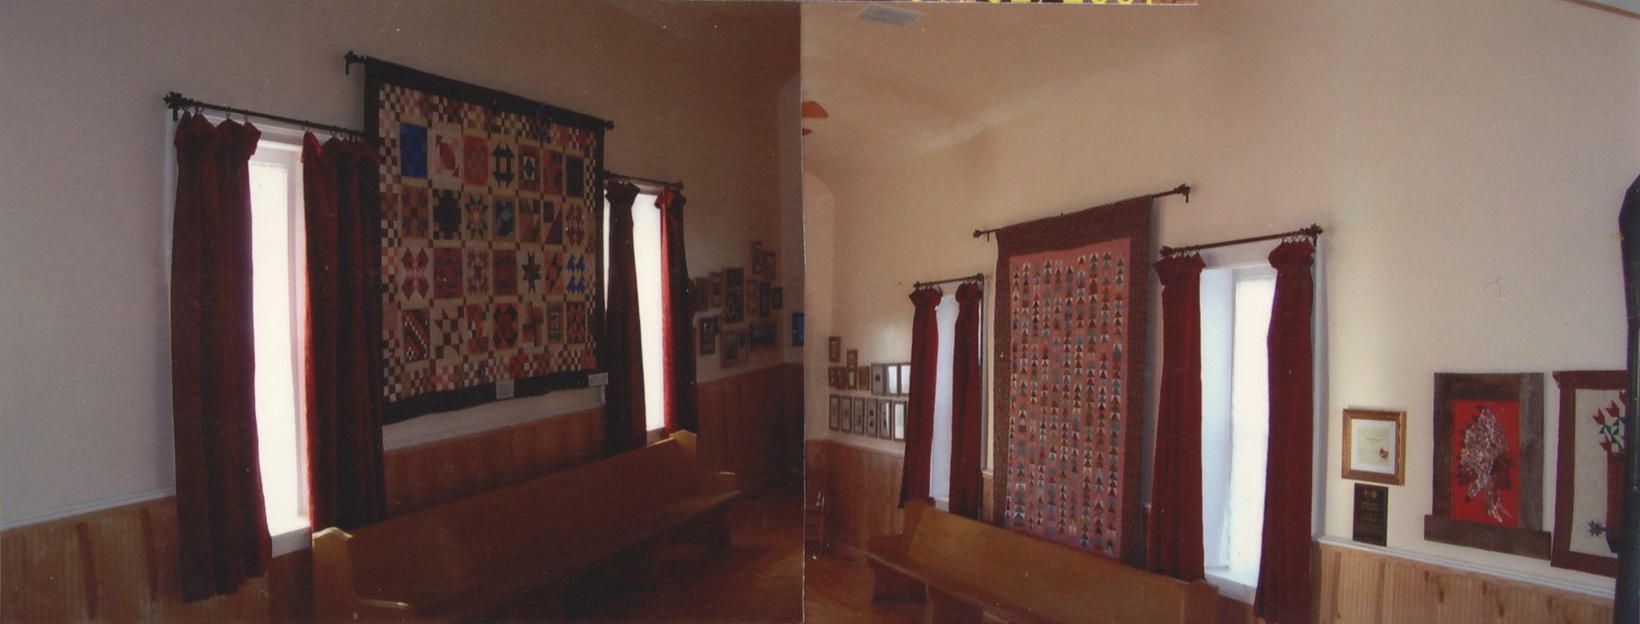 Photo of the inside of the old Toquerville Church after remodelling